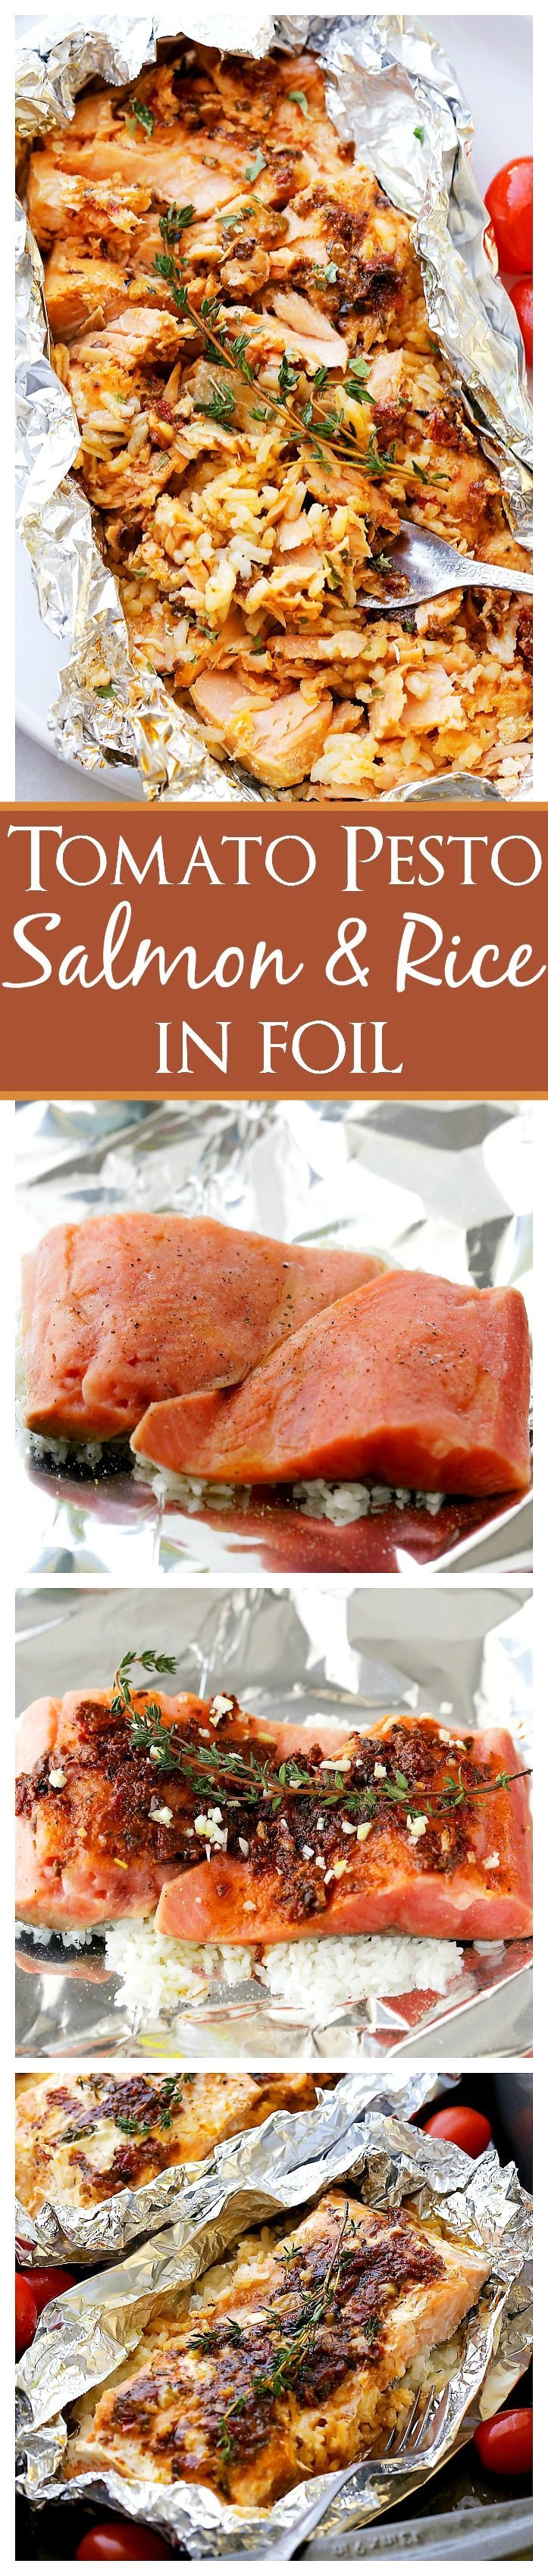 Tomato Pesto Salmon and Rice Recipe Baked in Foil – Incredibly flavorful, quick, 30-minute healthy dinner